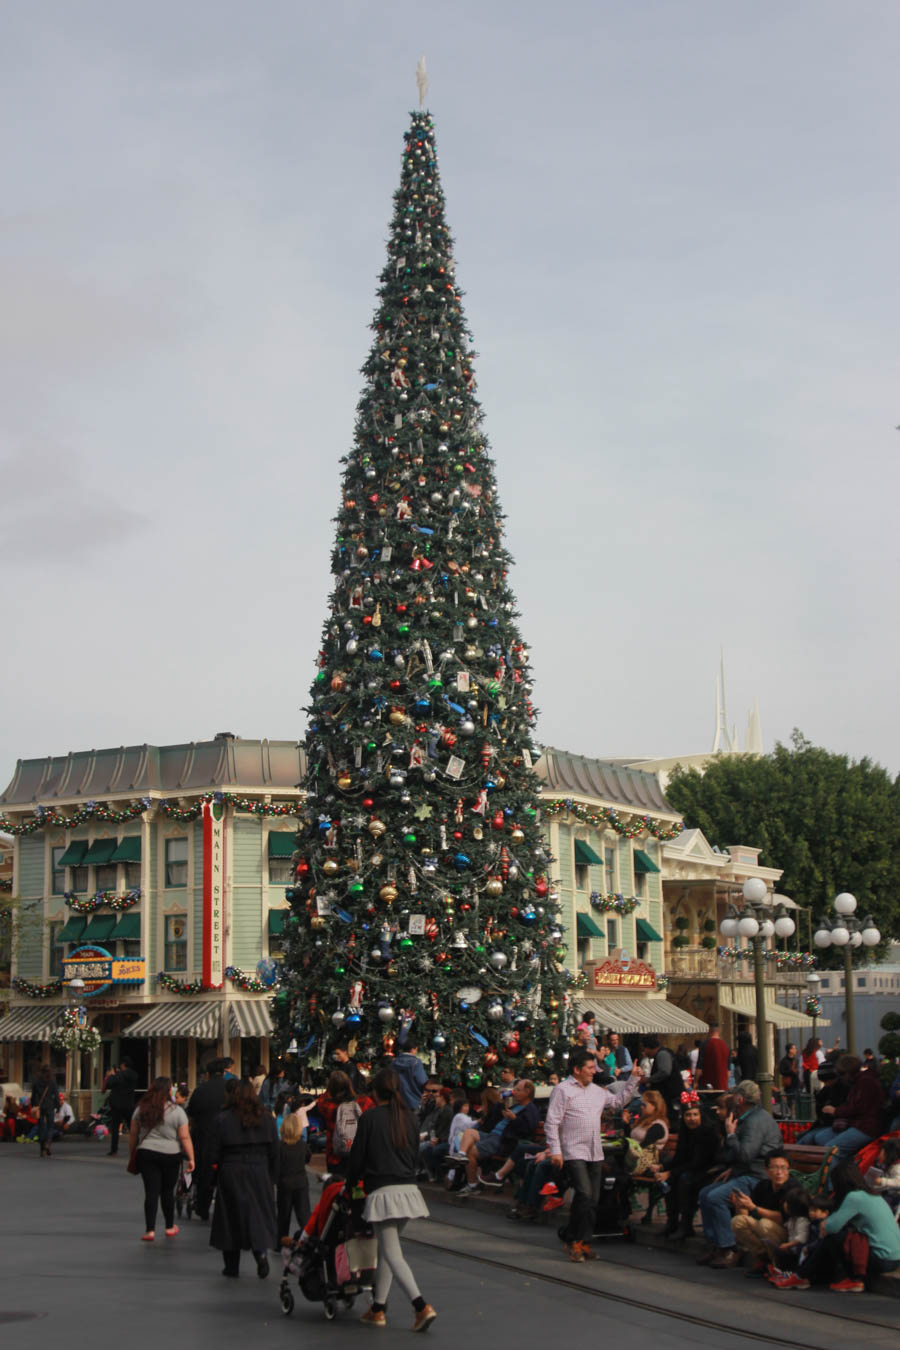 Breakfast at Disneyland and preparing for the Christmas Eve Tour 12/24/2015